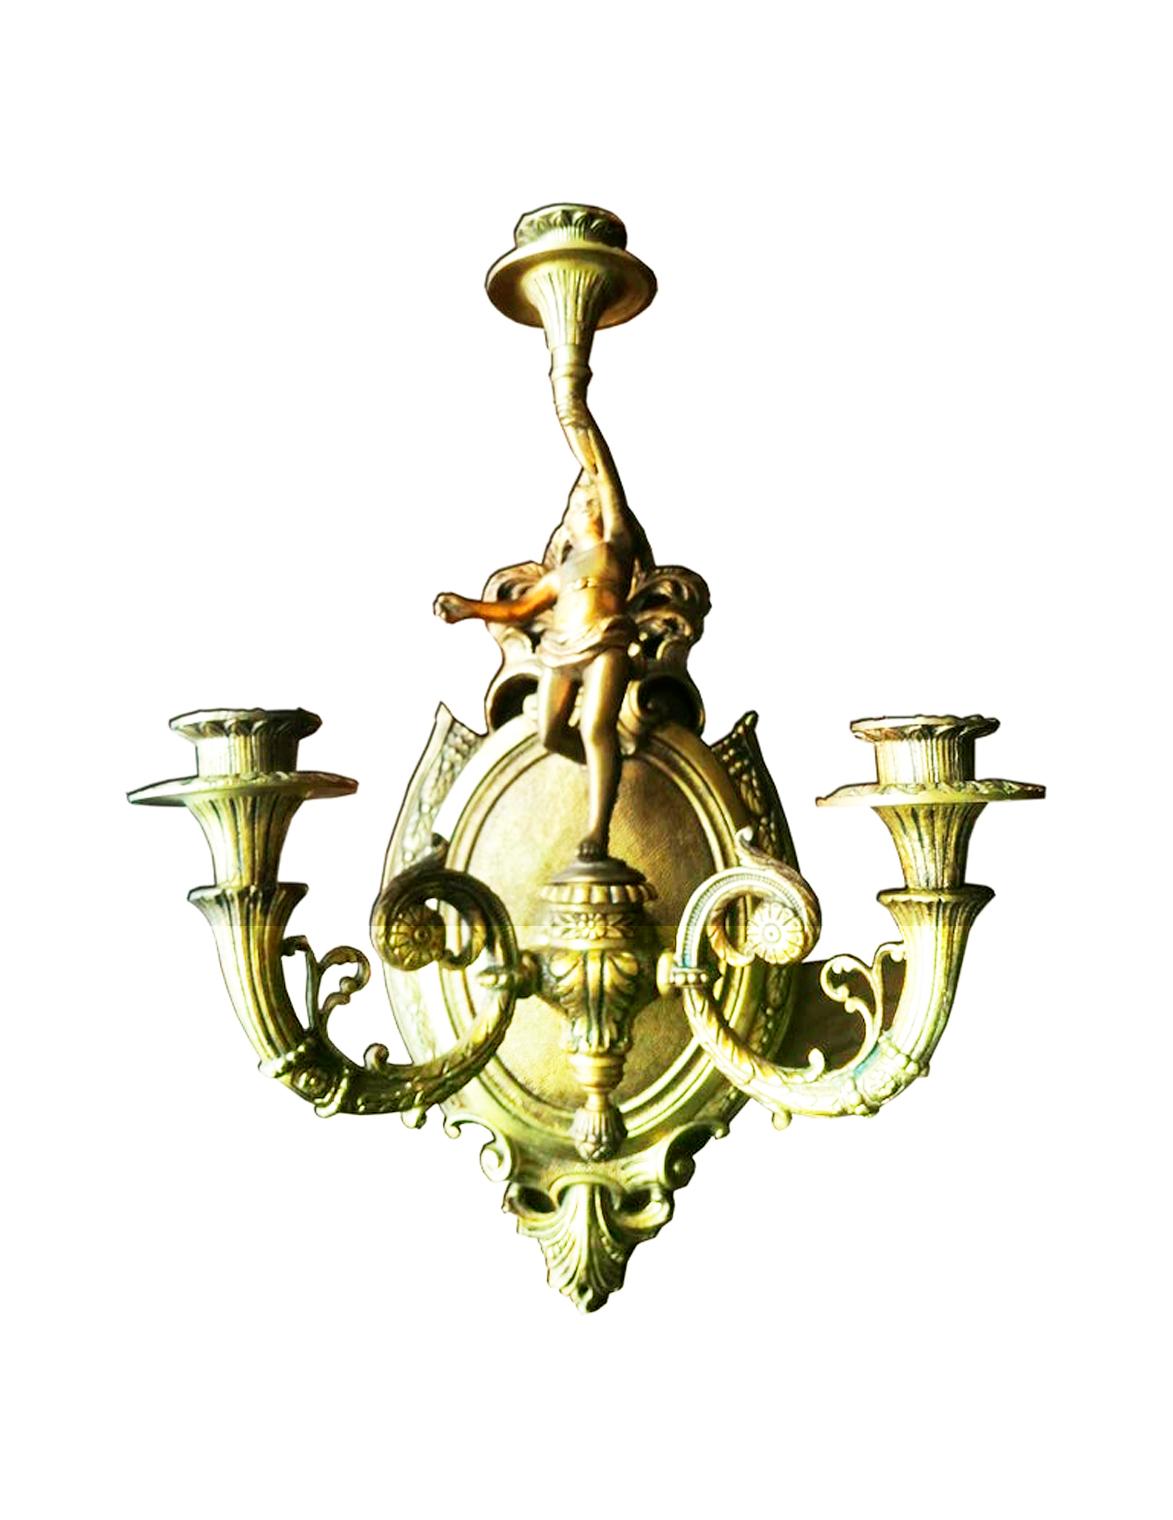  Wall Sconces French Empire Style Whit Cherub Putti Carrying Torch, Bronze, Pair For Sale 5